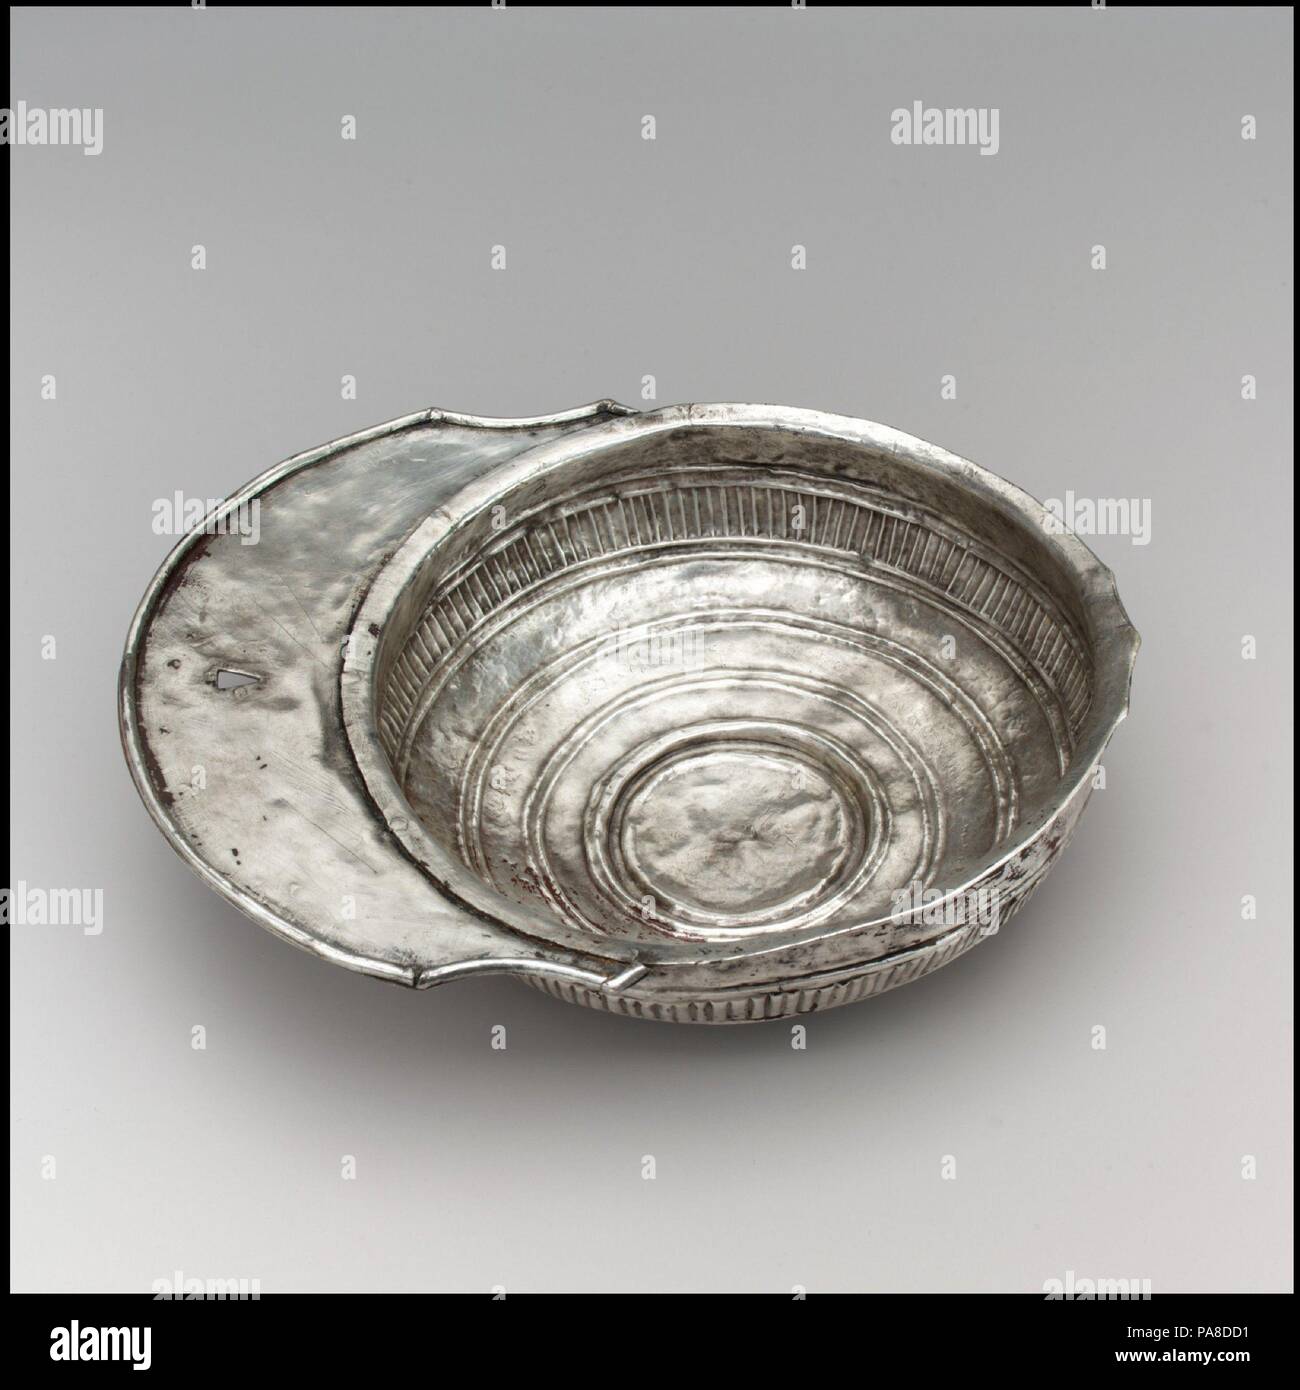 Silver Drinking Bowl with Handle. Culture: Avar. Dimensions: 2 × 9 15/16 × 7 5/16 in., 9.613 Troy Ounces (5.1 × 25.2 × 18.5 cm, 299g)  Other (diameter of cup only): 7 5/16 in. (18.5 cm). Date: 700s.  The Avars  The Avars were a nomadic tribe of mounted warriors from the Eurasian steppe. The Byzantine emperor Justinian negotiated with them in the sixth century to protect the Empire's northern border along the Black Sea. Emboldened by their subjugation of numerous tribes, they unsuccessfully attempted to seize the Empire's capital, Constantinople. They remained a scourge of both Byzantium and th Stock Photo